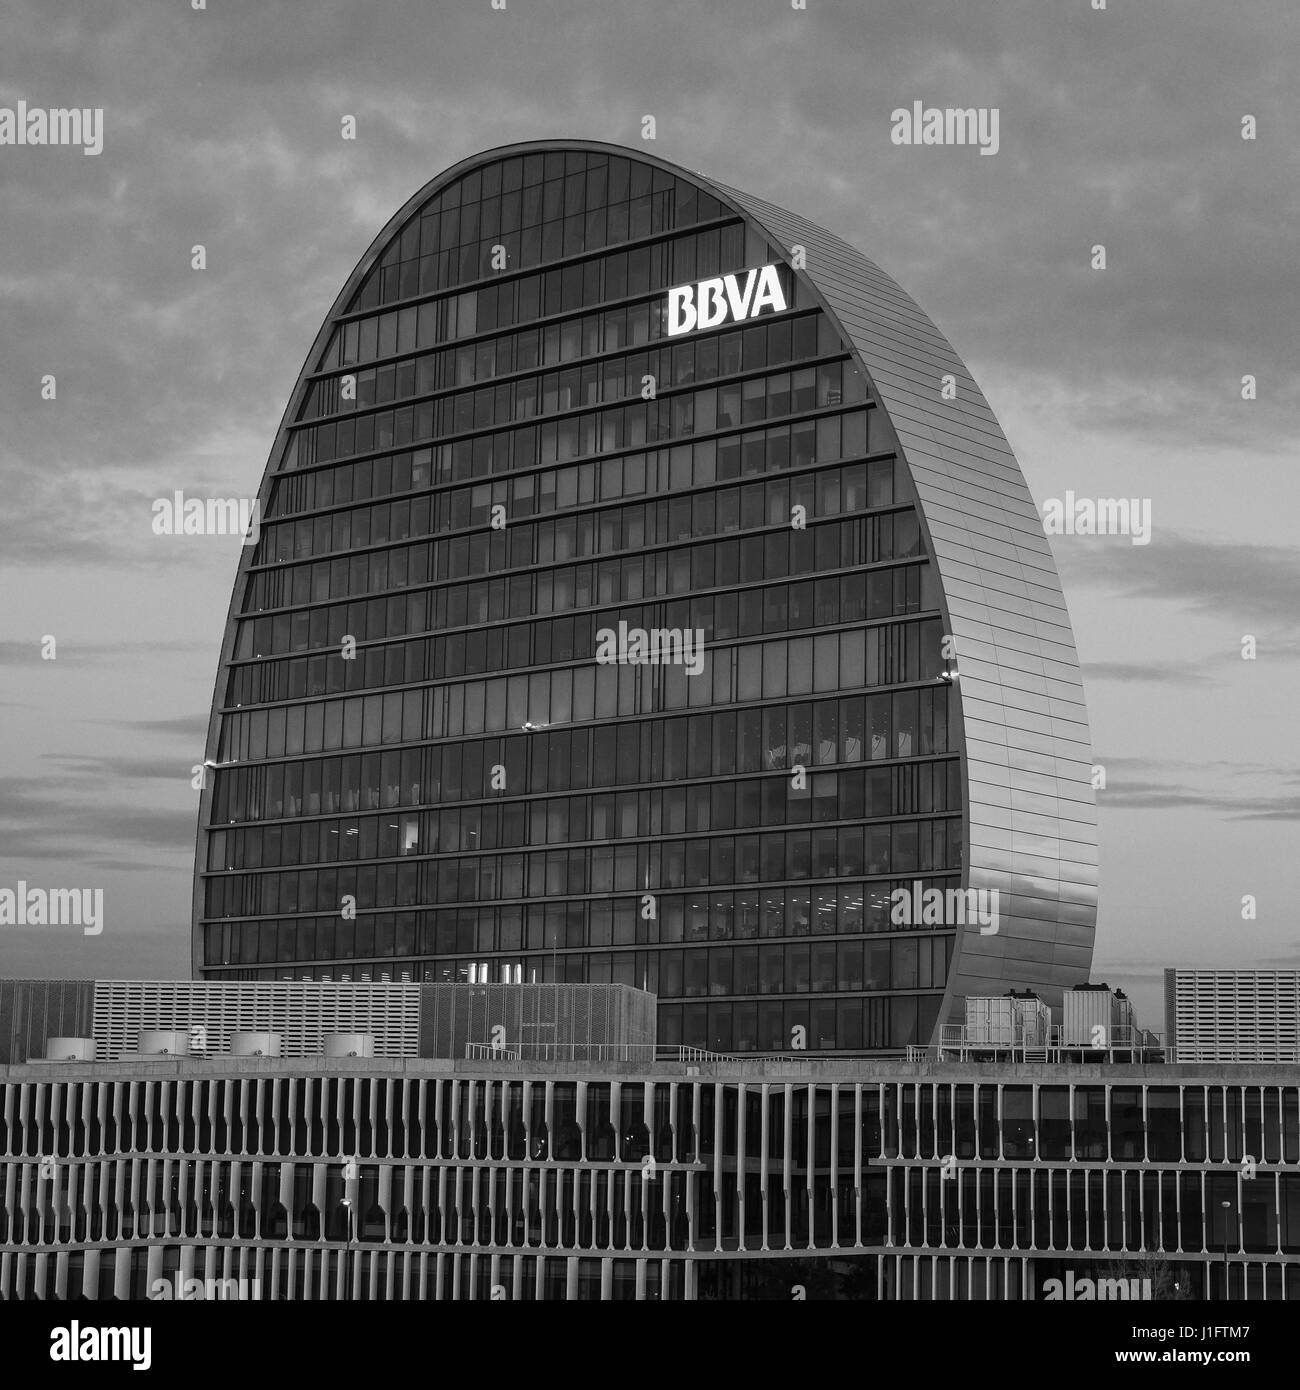 Building La Vela in Madrid. Seat of the bank BBVA, is 93 meters high, 19 floors and an irregular elliptical tower was designed by Swiss architecture firm Herzog & De Meuron, winner of the Pritzker Prize  Featuring: Atmosphere Where: Madrid, Spain When: 20 Mar 2017 Credit: Oscar Gonzalez/WENN.com Stock Photo